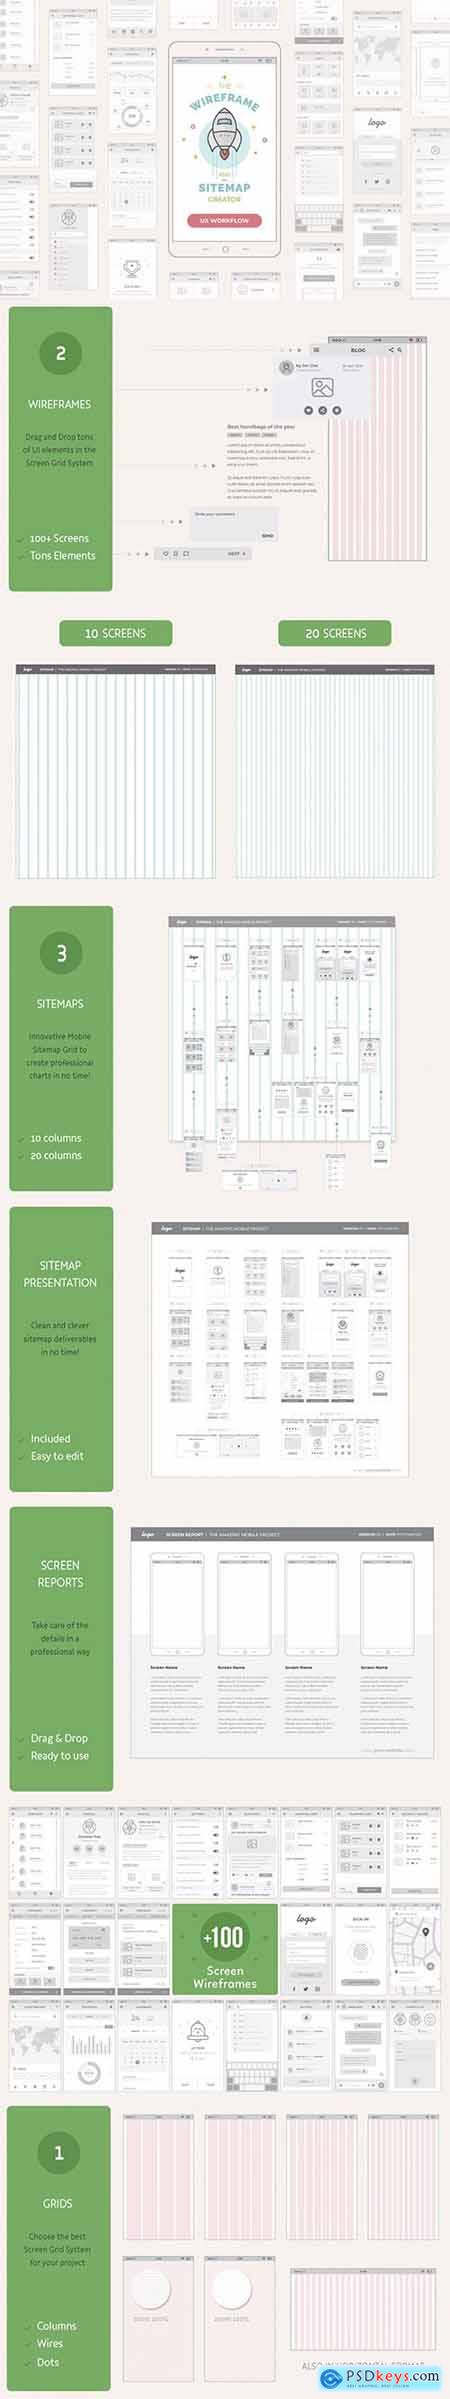 Download UX Workflow - Mobile Wireframe and Sitemap Creator » Free ...